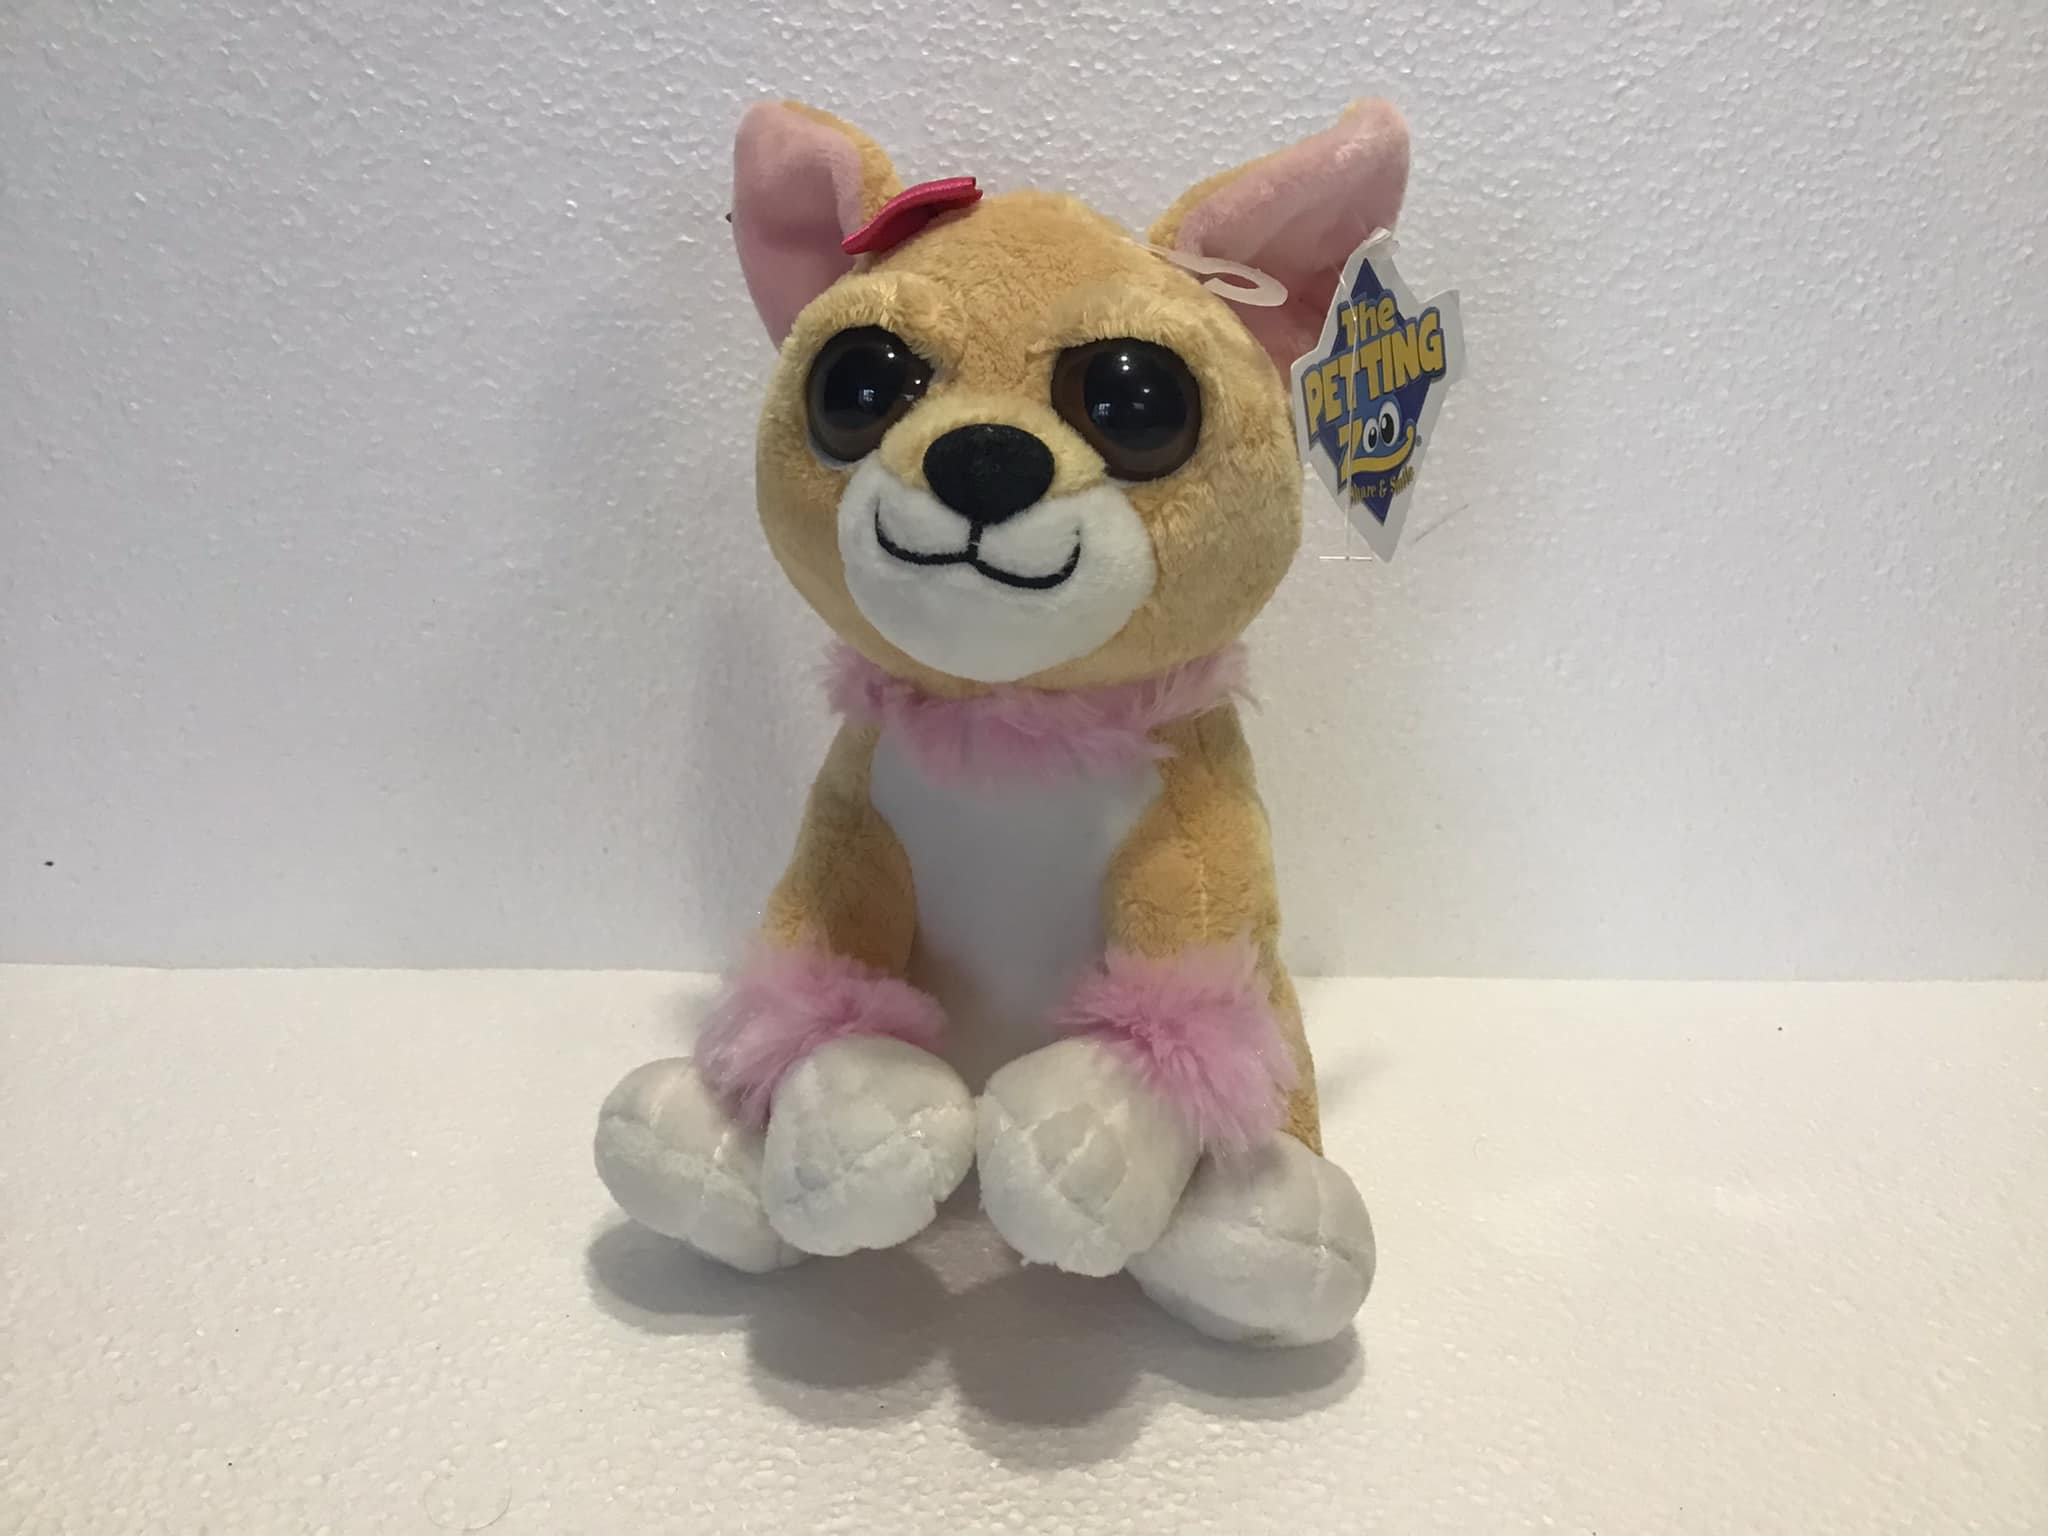 Linzy Toys Plush Red Chihuahua 6.5 inch Puppy Dog Stuffed Animal Pal with Rainbow